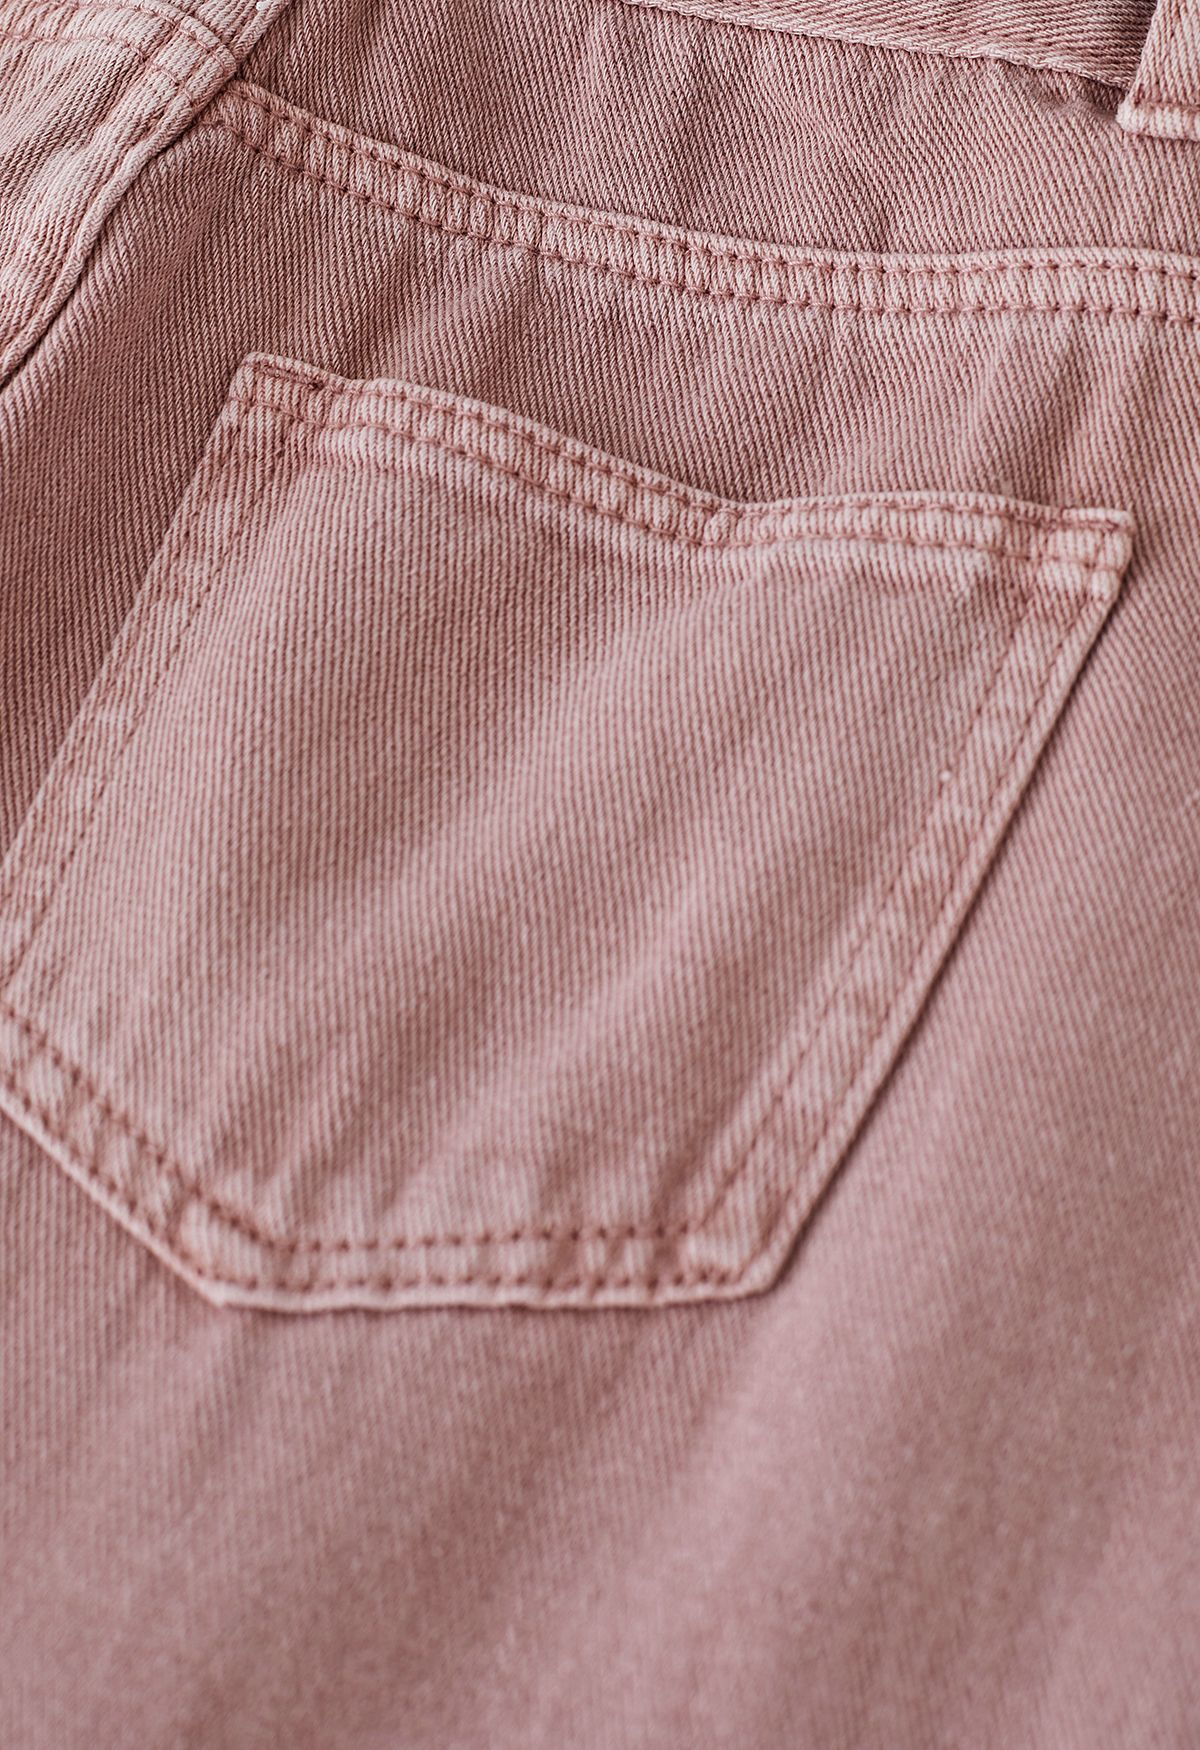 Distressed Straight-Leg Belted Jeans in Pink